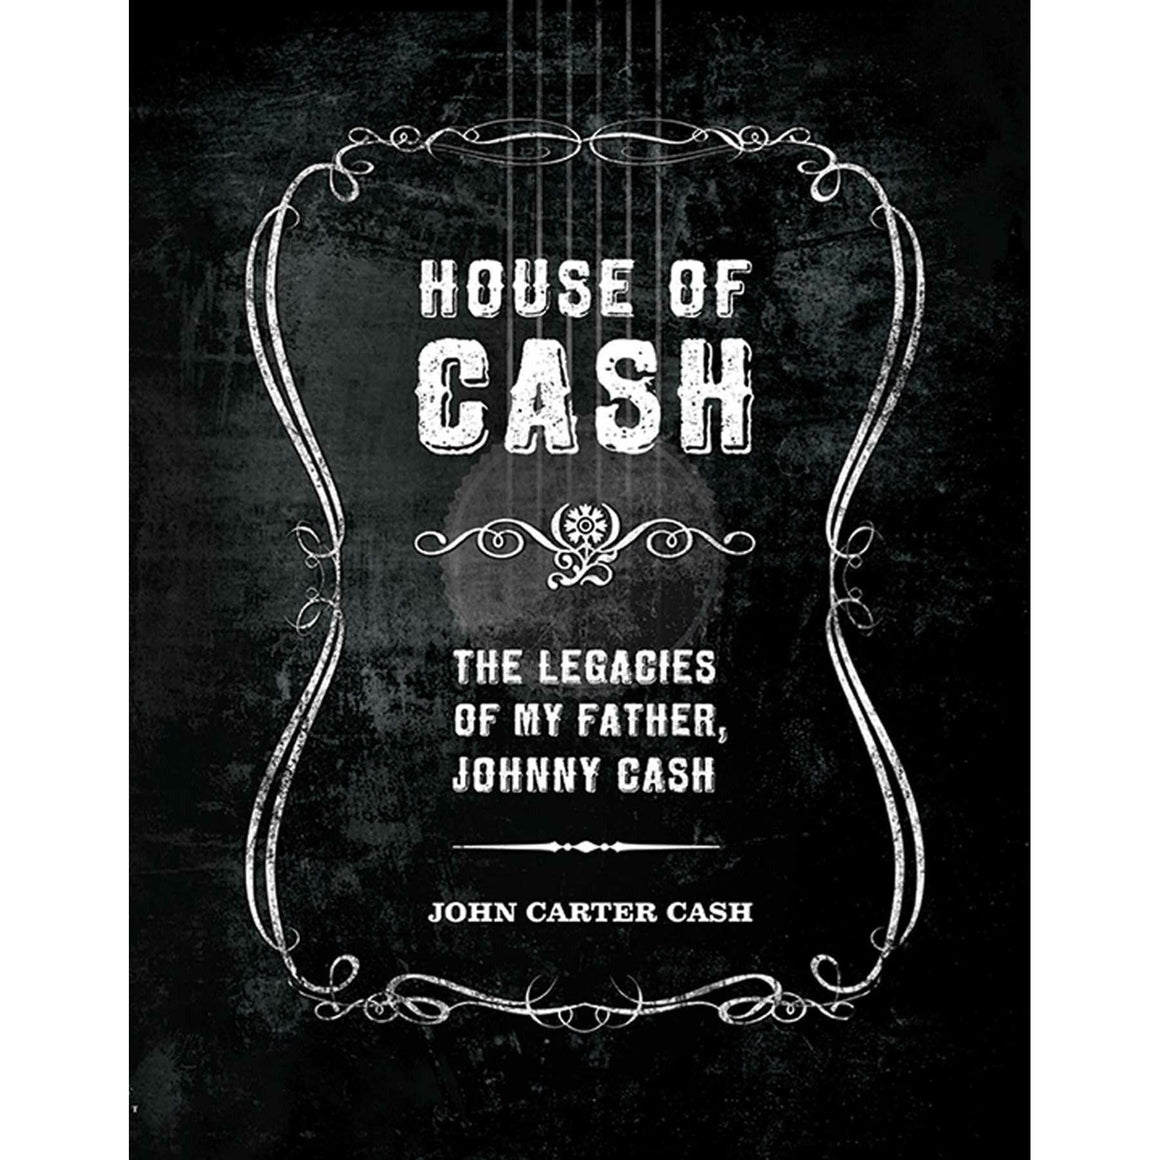 House of Cash The Legacies of My Father, Johnny Cash